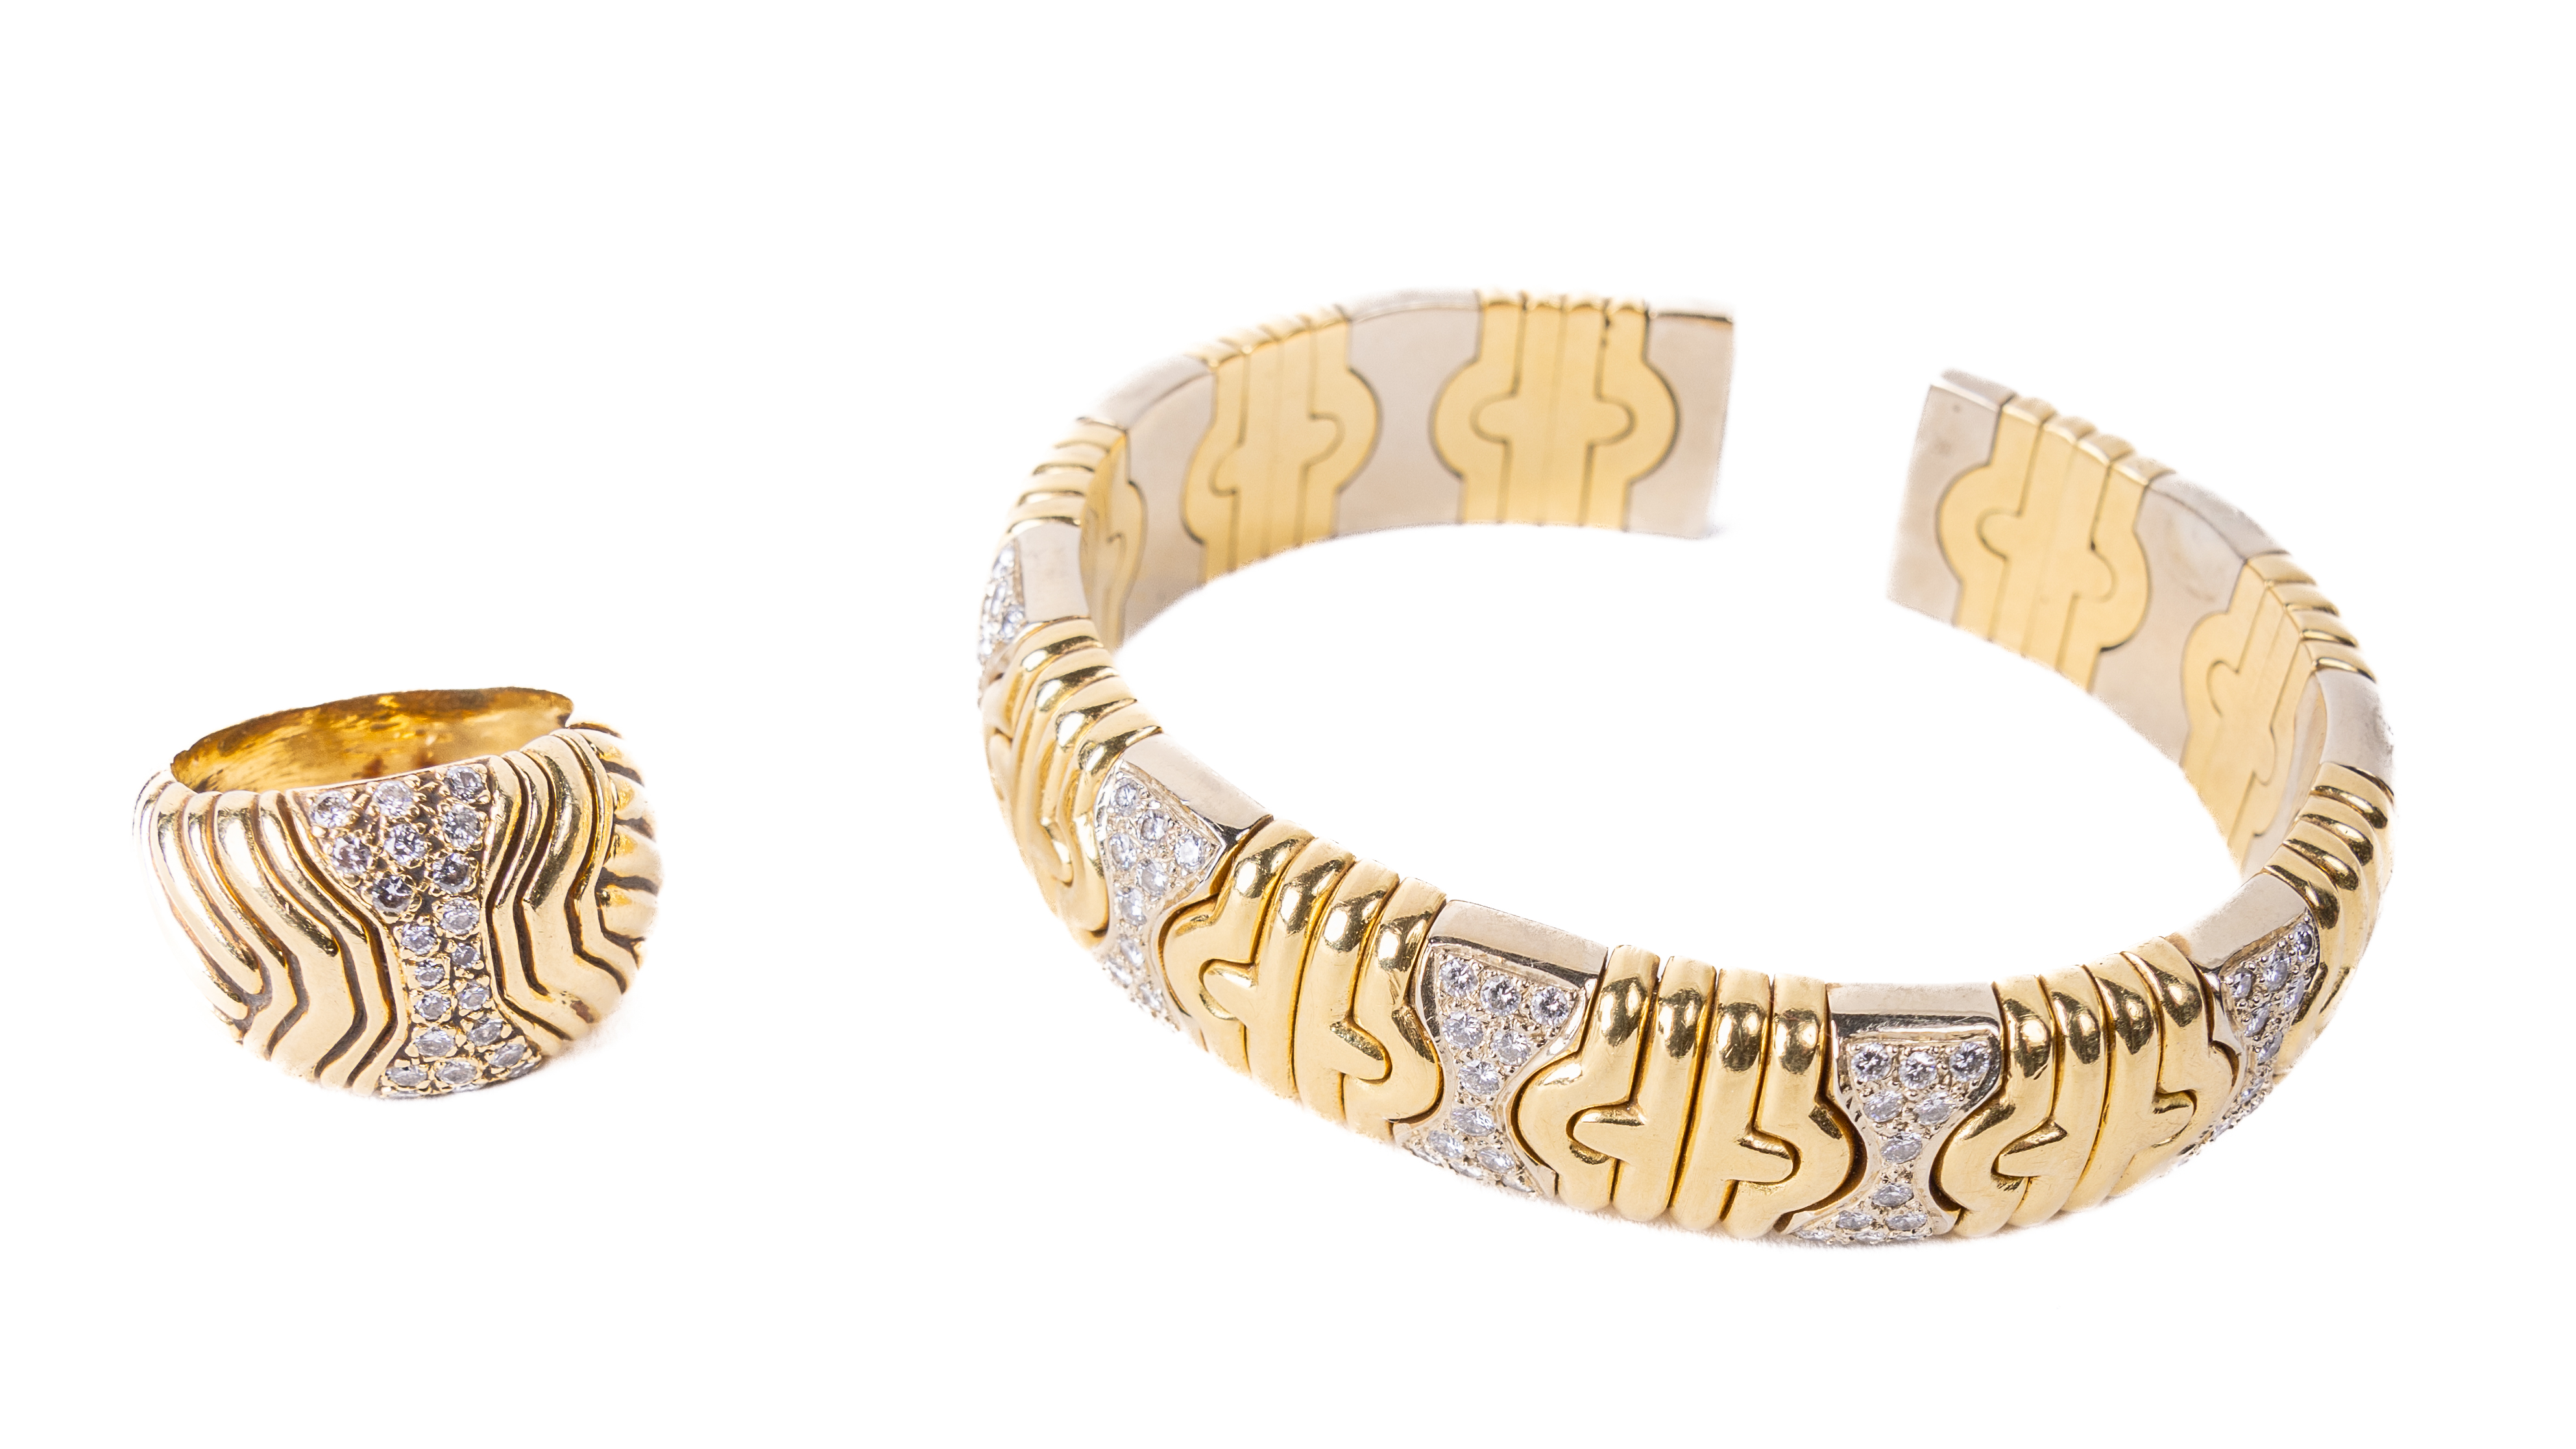 An attractive 18ct lime and yellow gold Bulgari design rigid Bracelet, set with 60 diamonds 1.